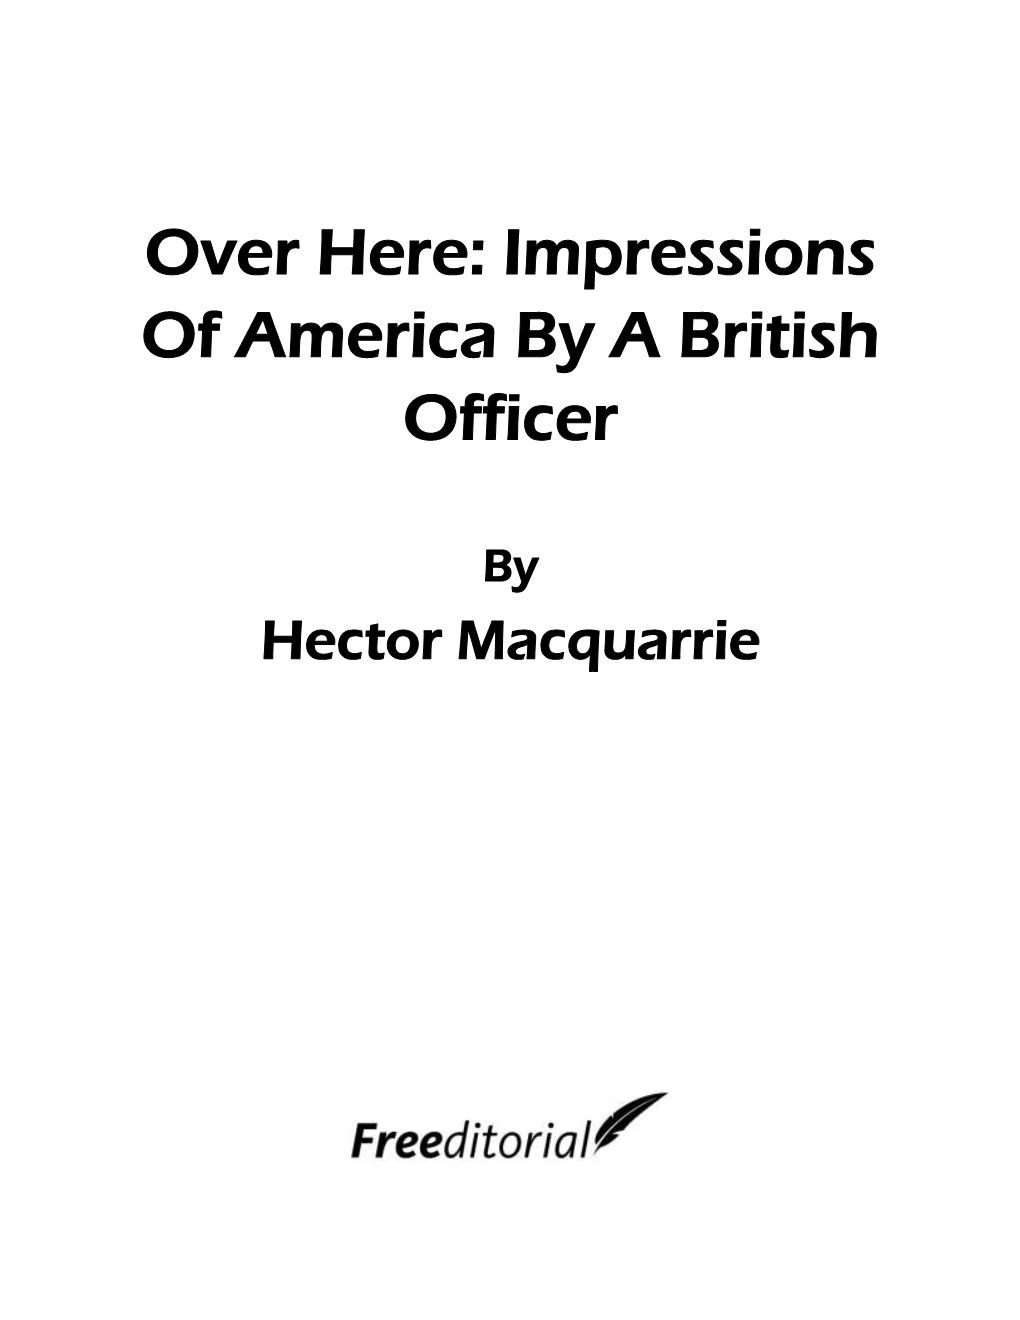 Over Here: Impressions of America by a British Officer